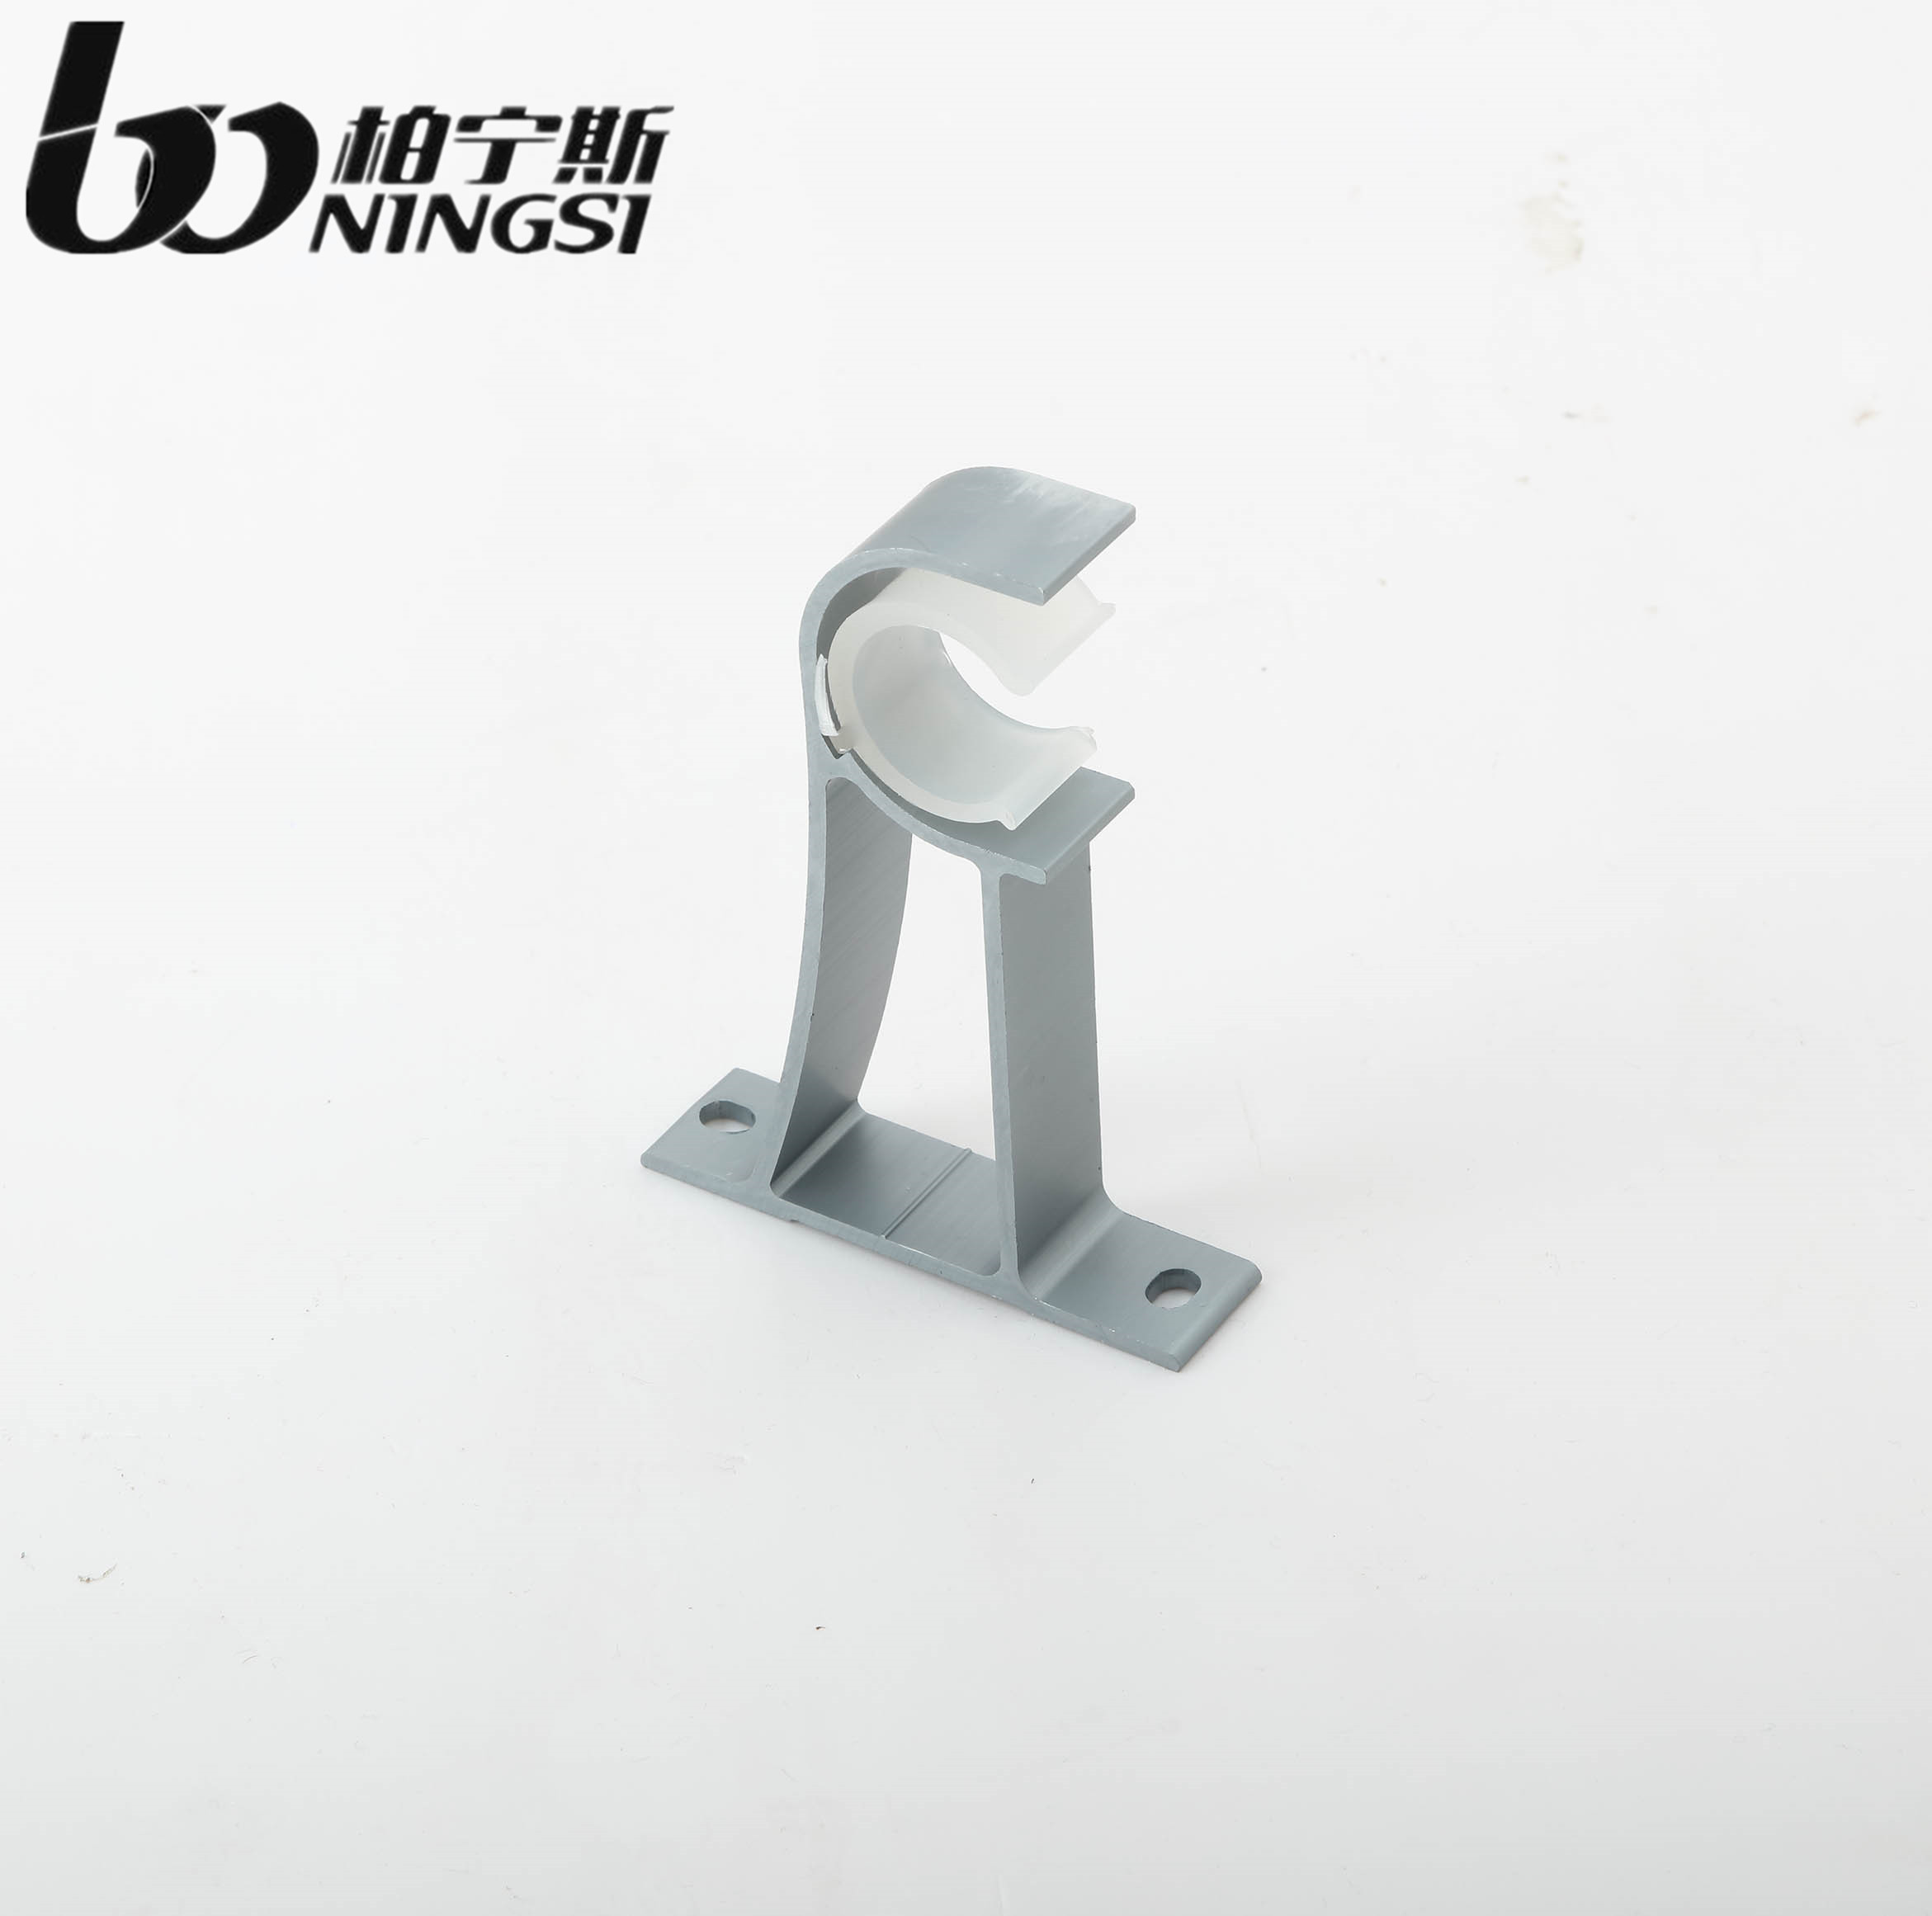 19mm Diameter 0.5mm Thick Adjustable Curtain Rod Brackets Extended